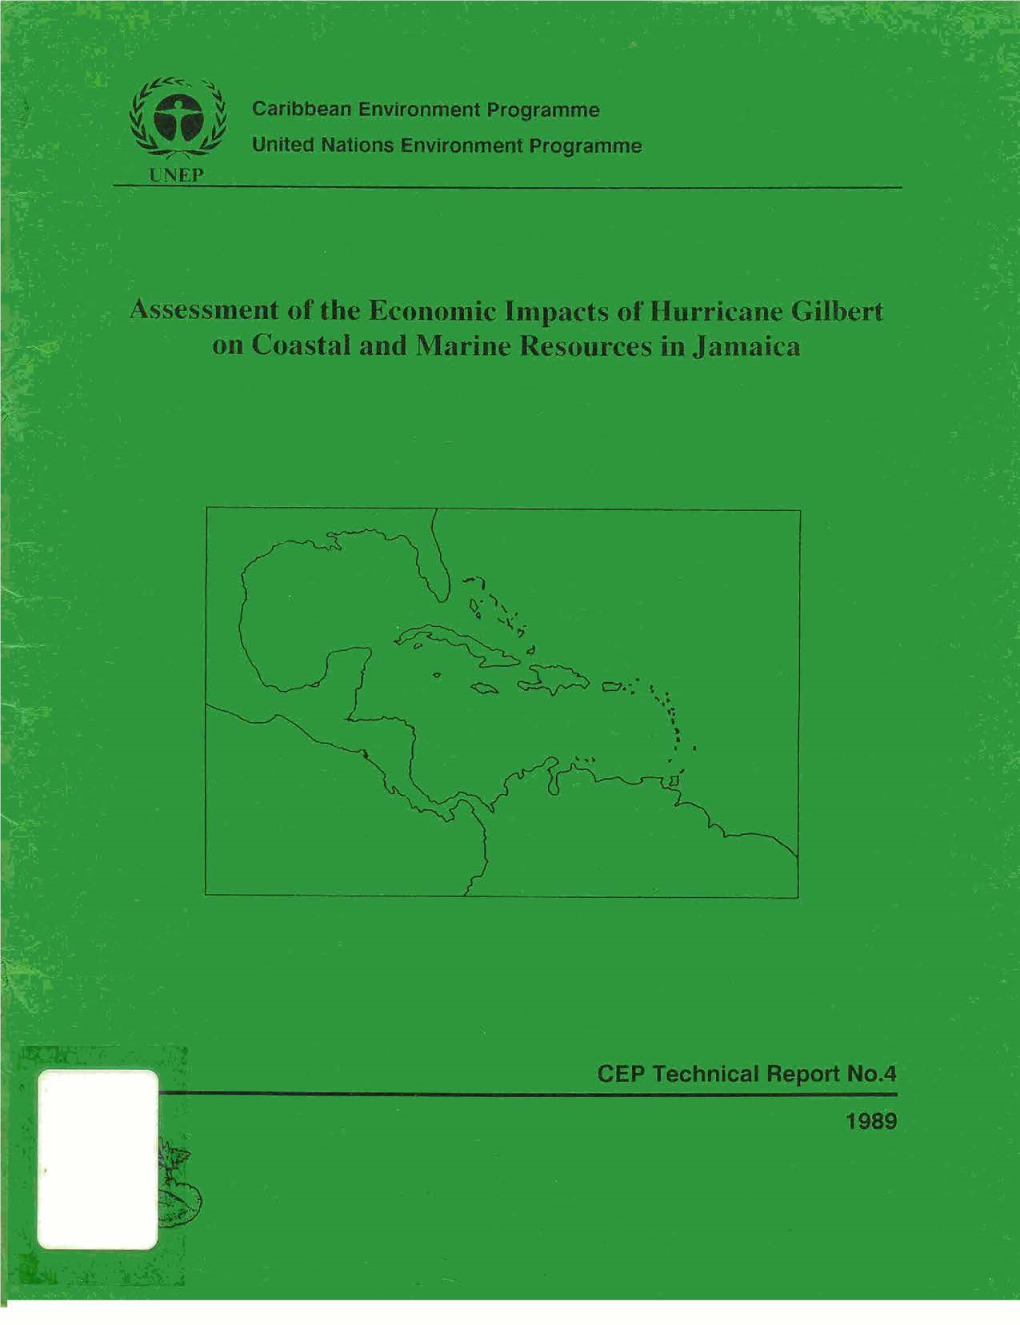 Assessment of the Economic Impacts of Hurricane Gilbert on Coastal and Marine Resources in Jamaica